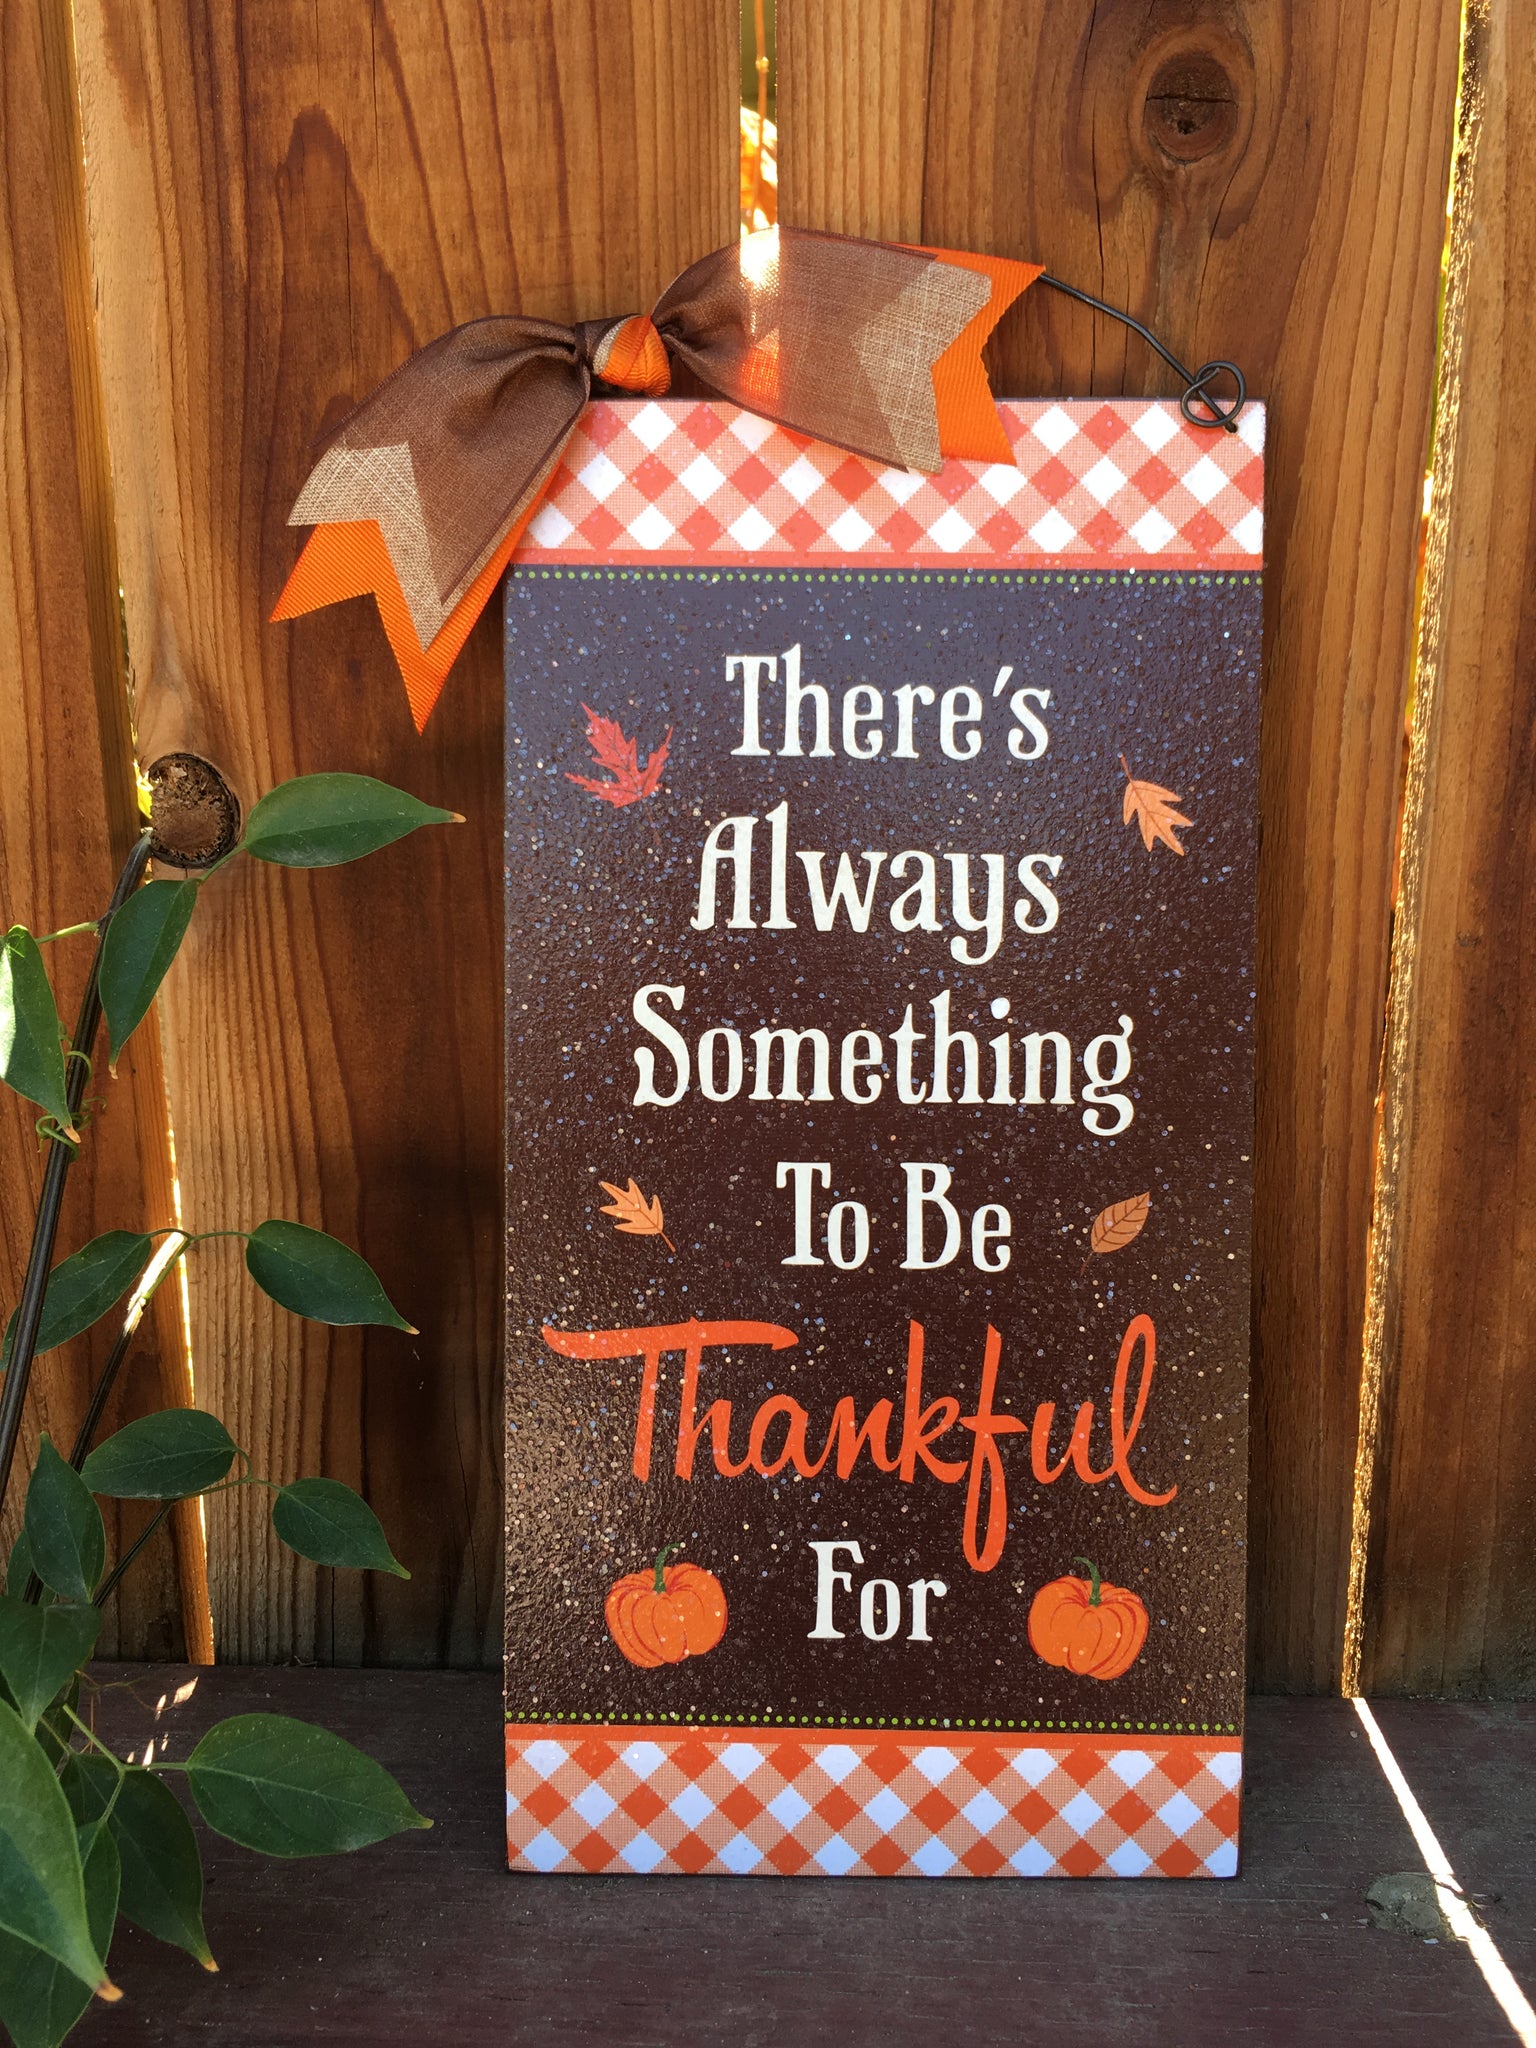 There's always something to be thankful for sign.